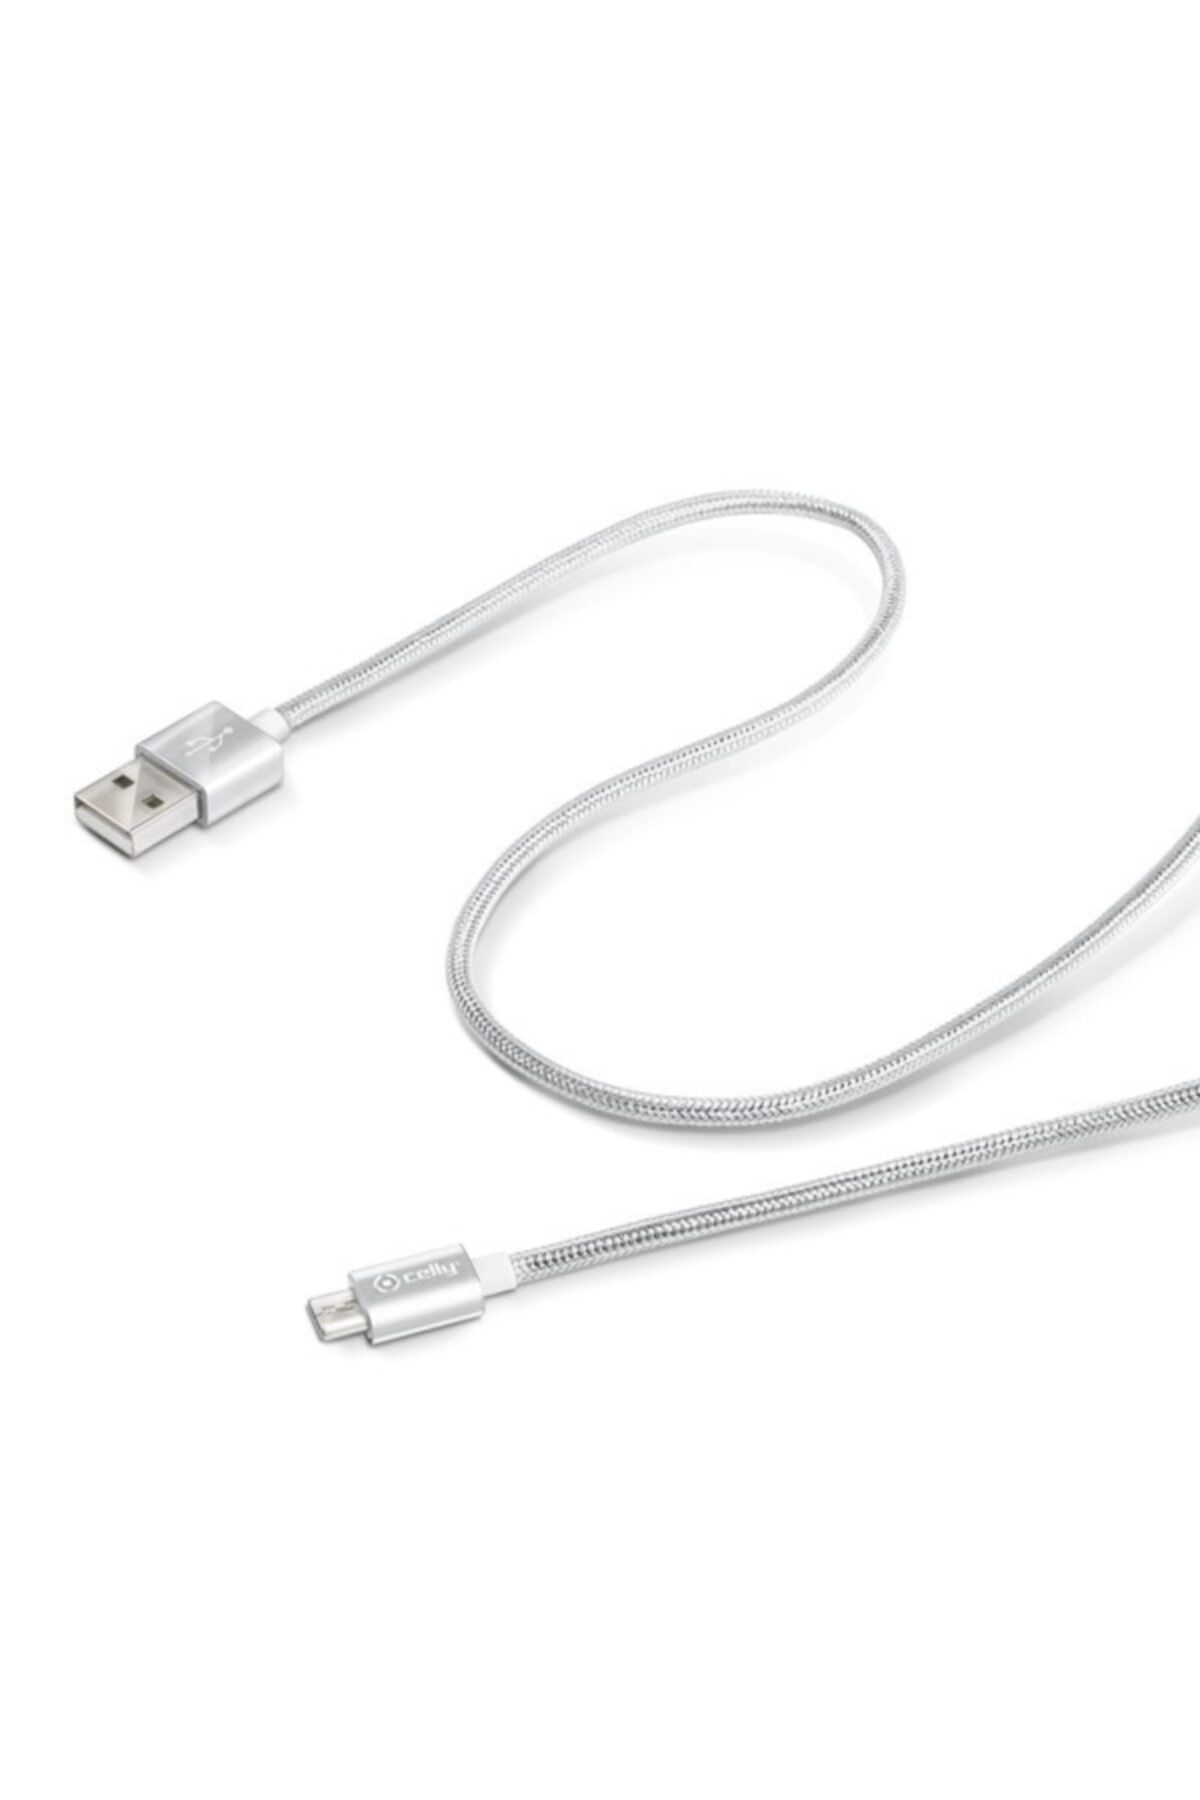 Celly Usb Cable Micro Textile Bk Usbmicrotexbk